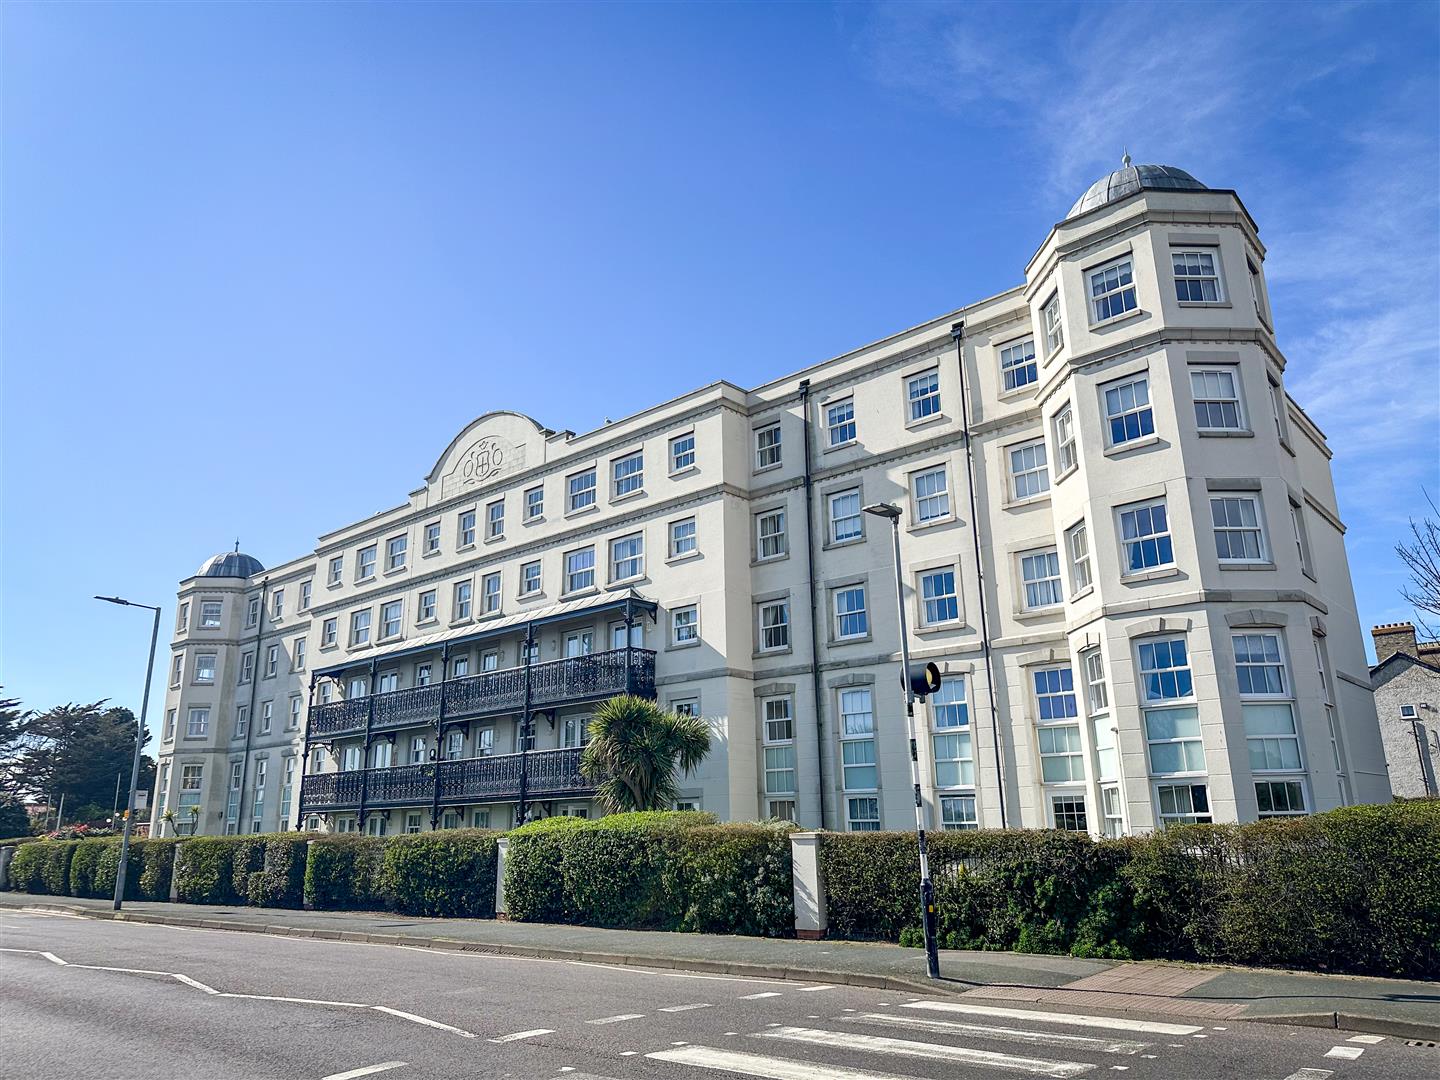 Imperial Court, Marine Parade West, Clacton-On-Sea